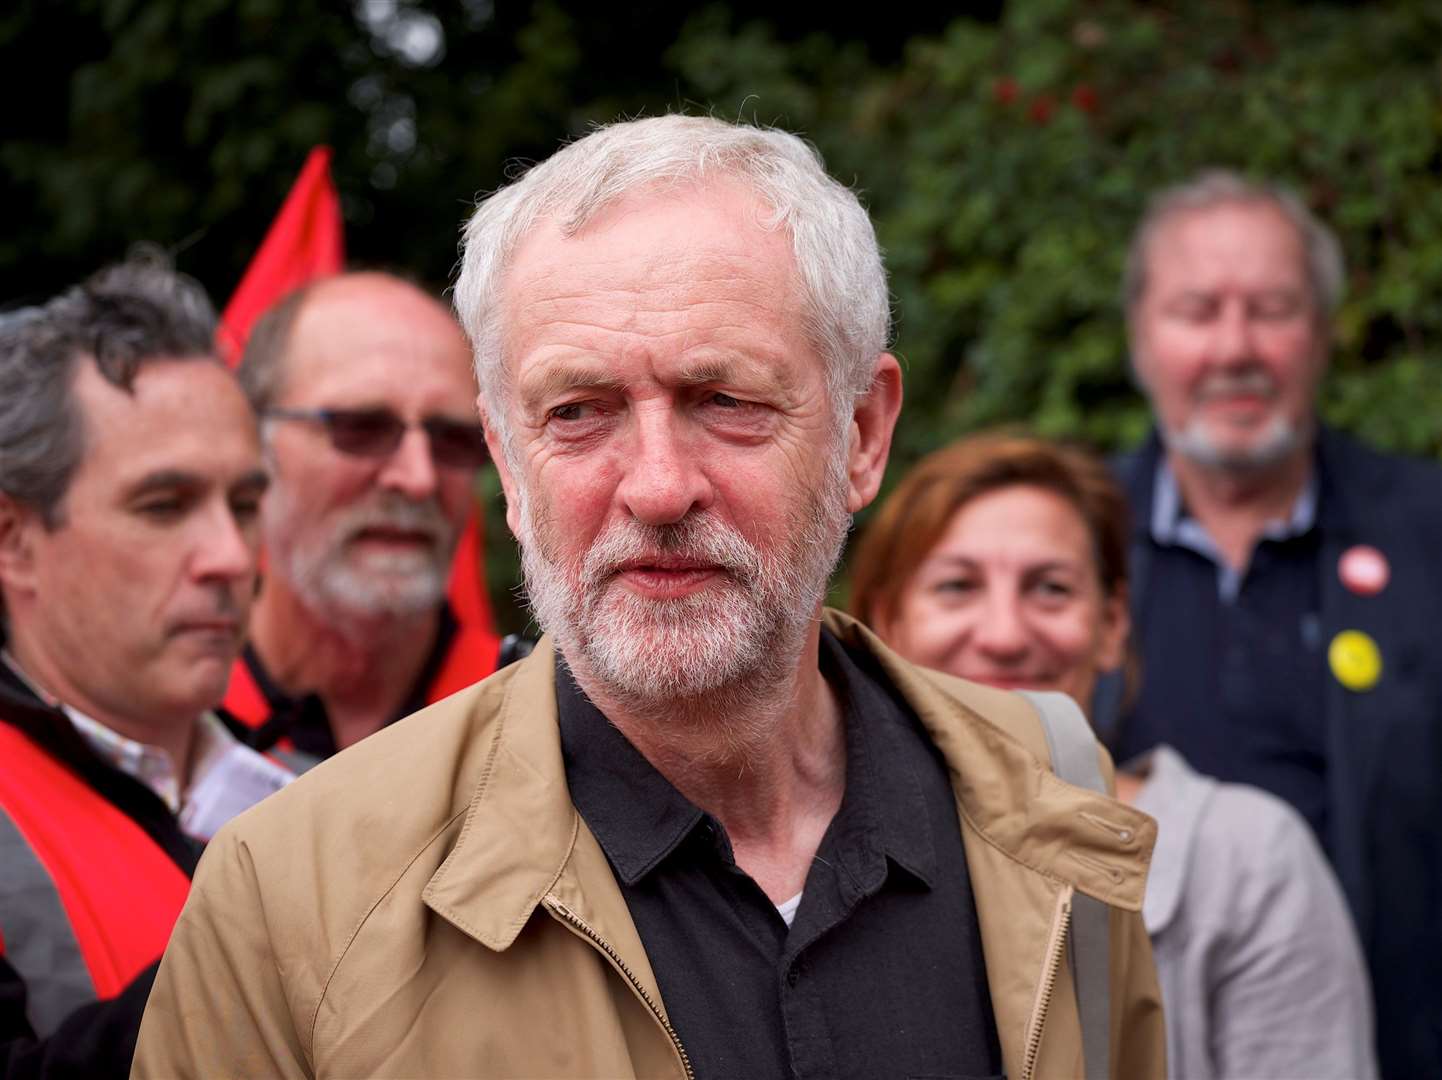 Cllr Ray Moon was suspended for attending a film show about former Labour leader Jeremy Corbyn.